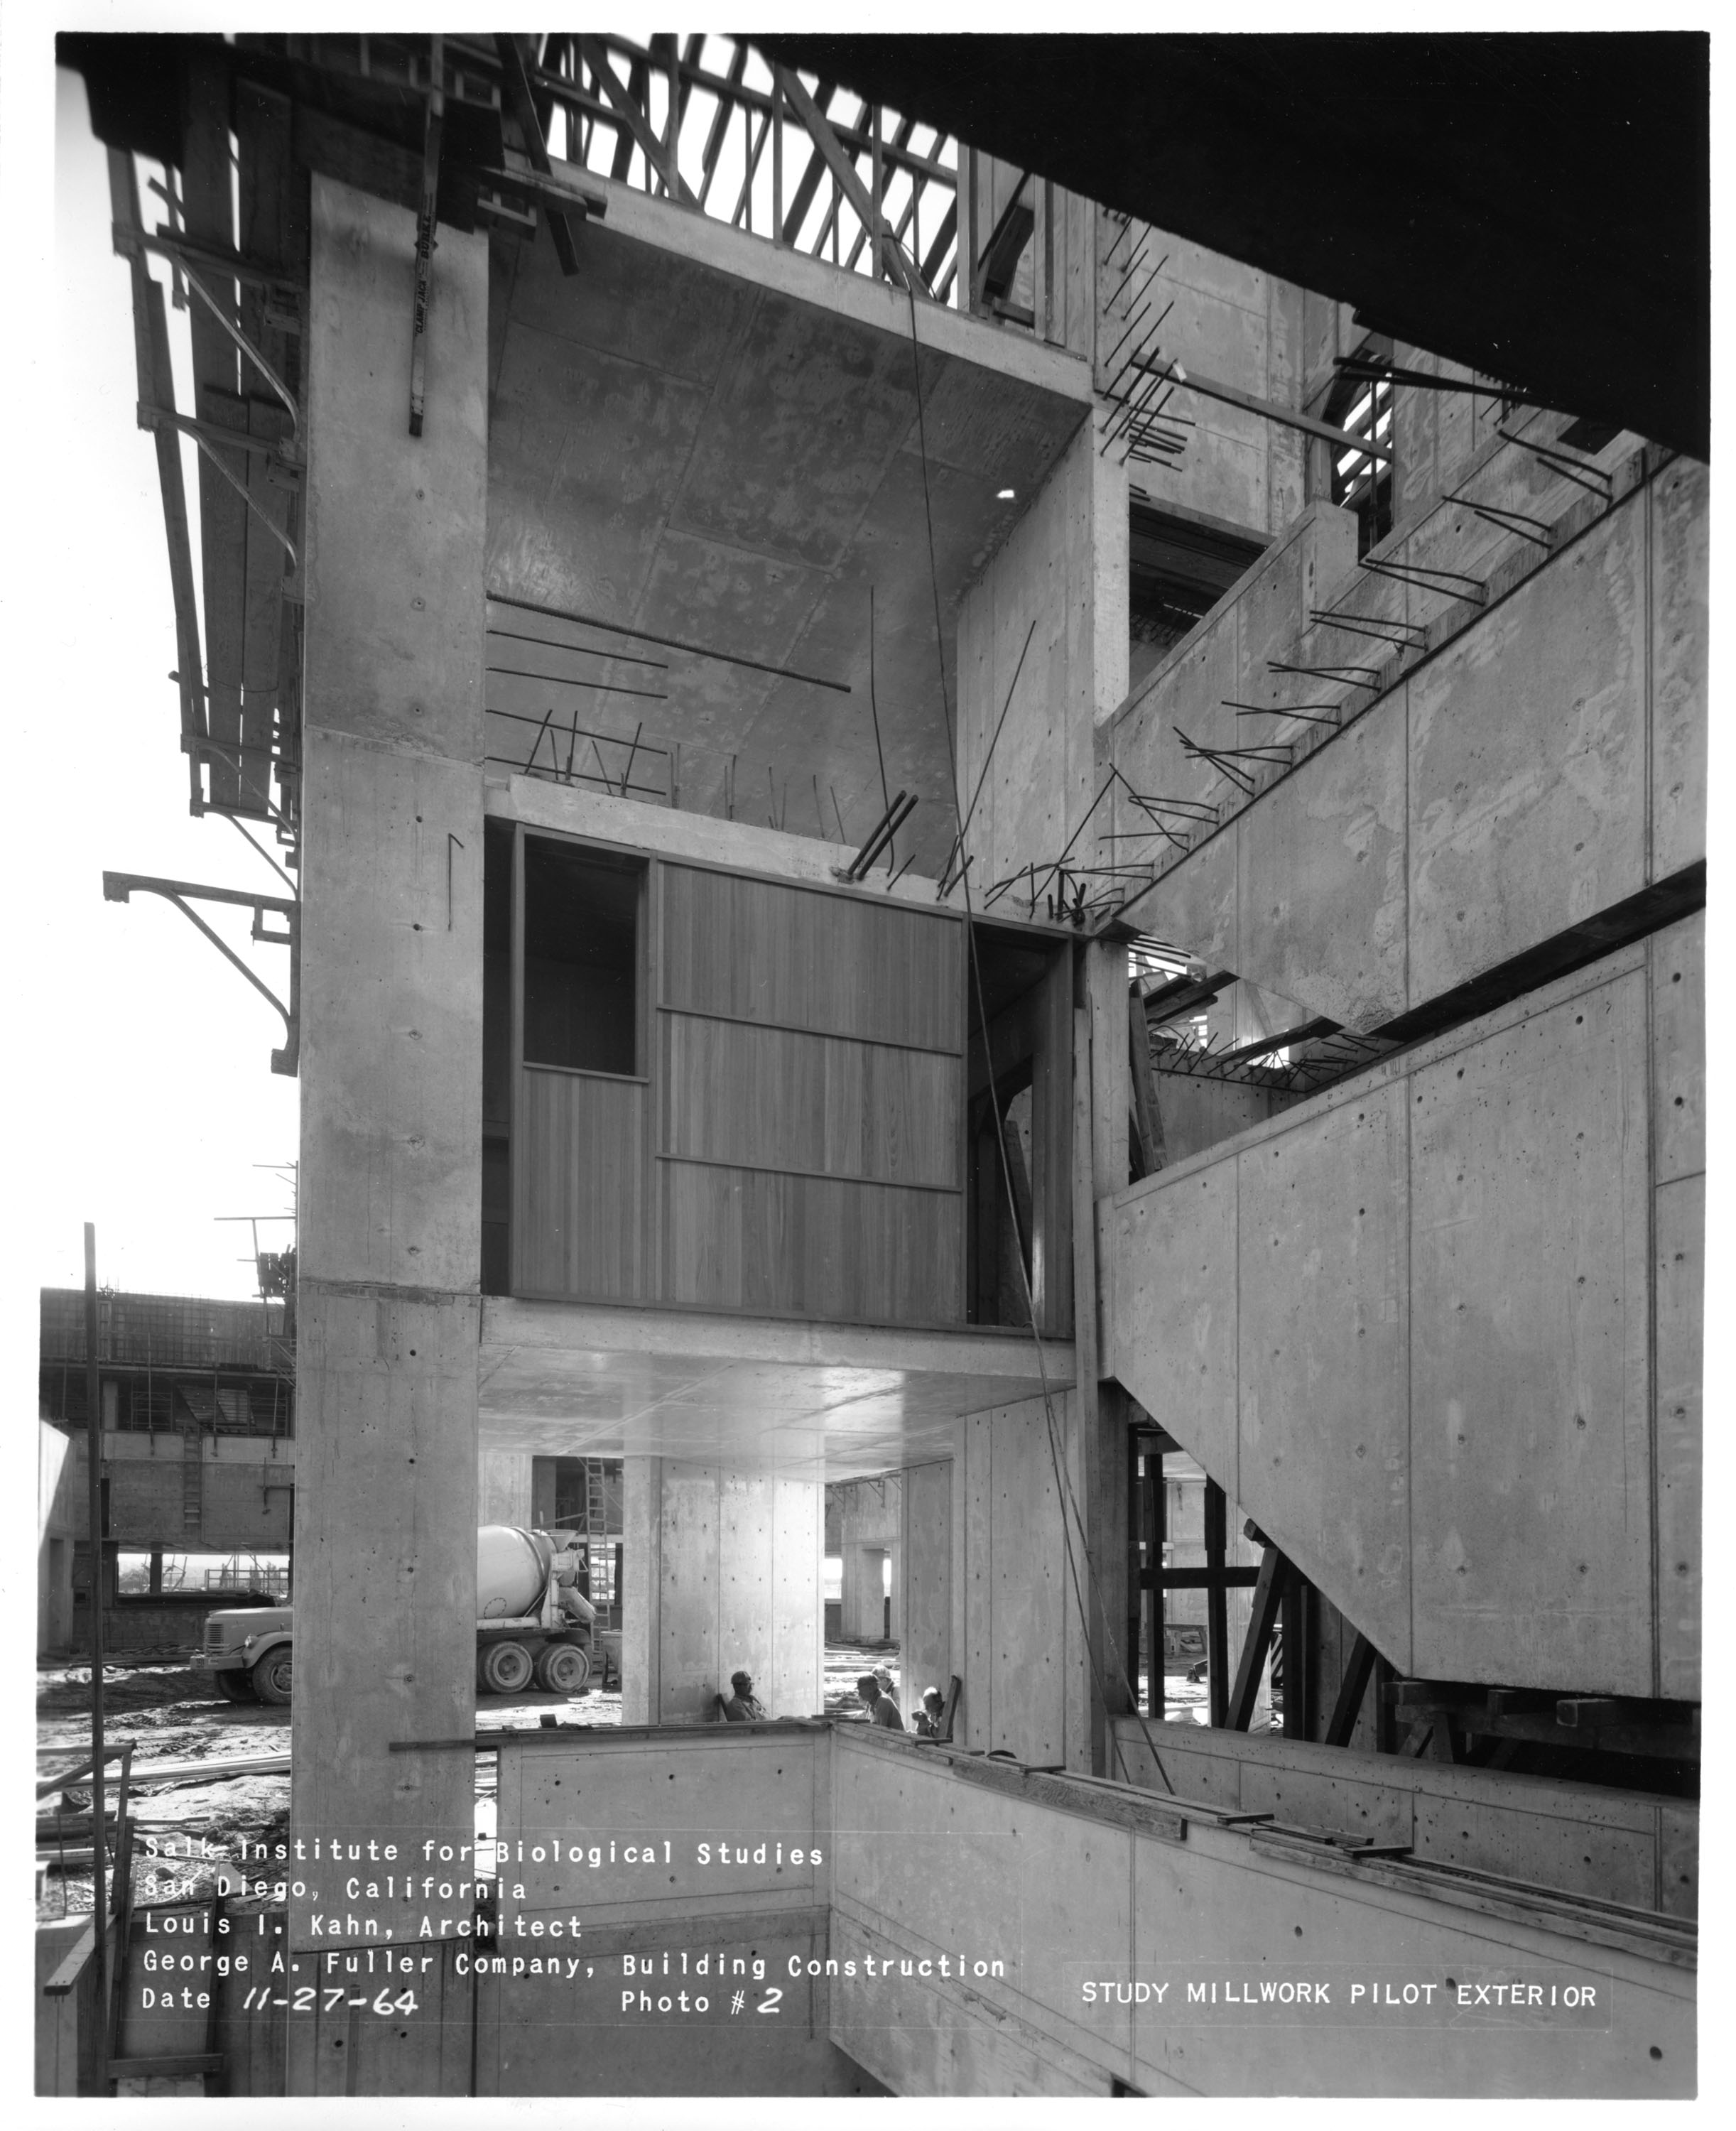 View of the first window wall being installed during construction, 1964. (Courtesy Salk Institute for Biological Studies archives)